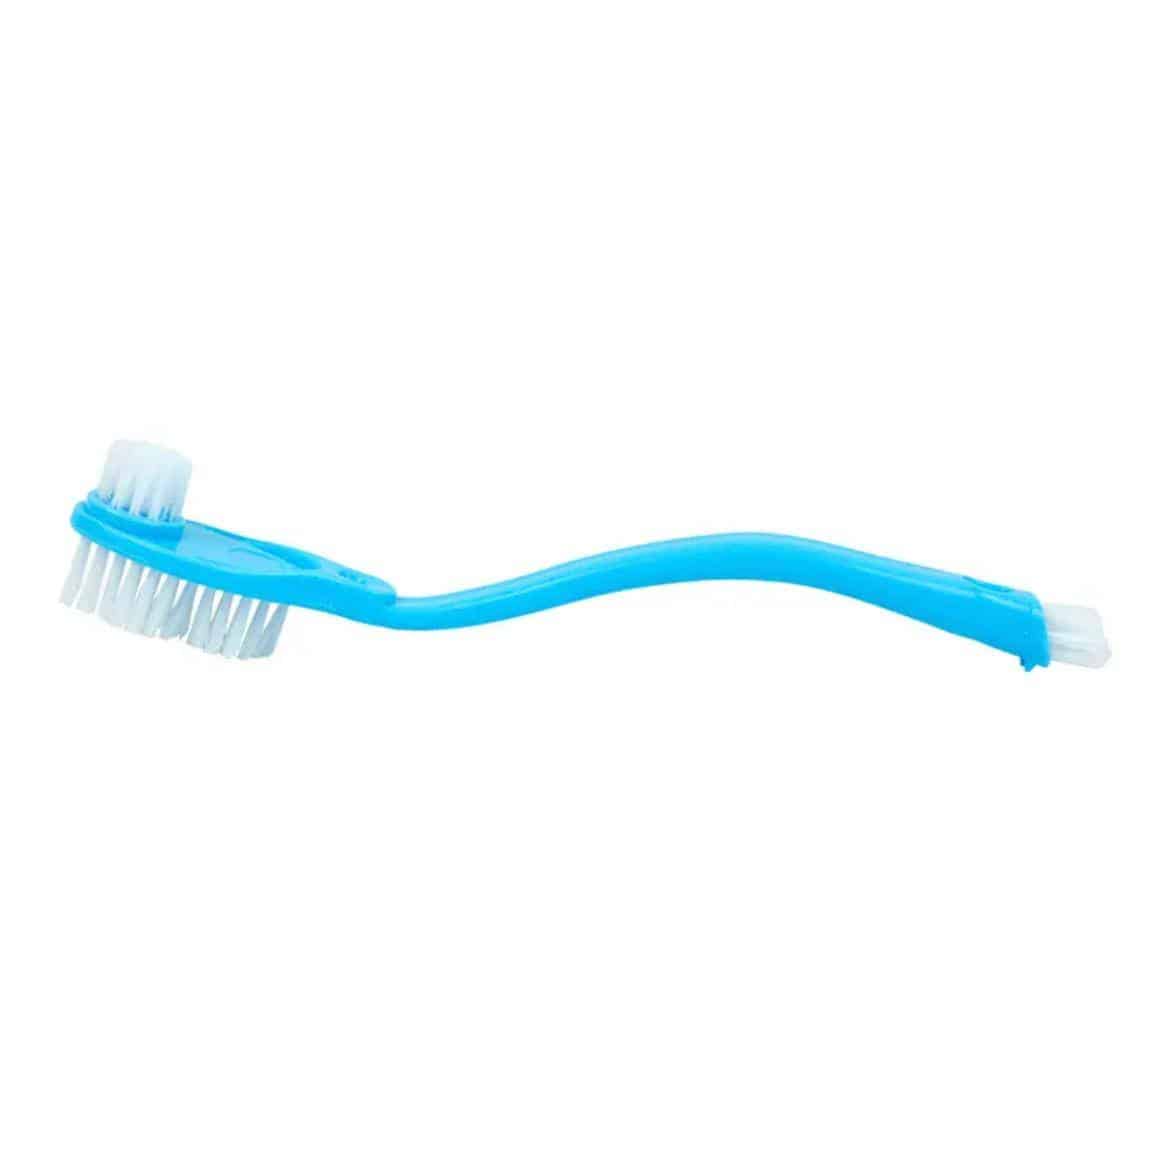 https://ineedaclean.com Shoe Cleaning Brush New Arrivals Cleaning Supplies Cleaning Supplies Under 10 Dollars color: Blue  I Need A Clean https://ineedaclean.com/the-clean-store/cleaning-brush-to-wash-shoes/?attribute_color=Blue